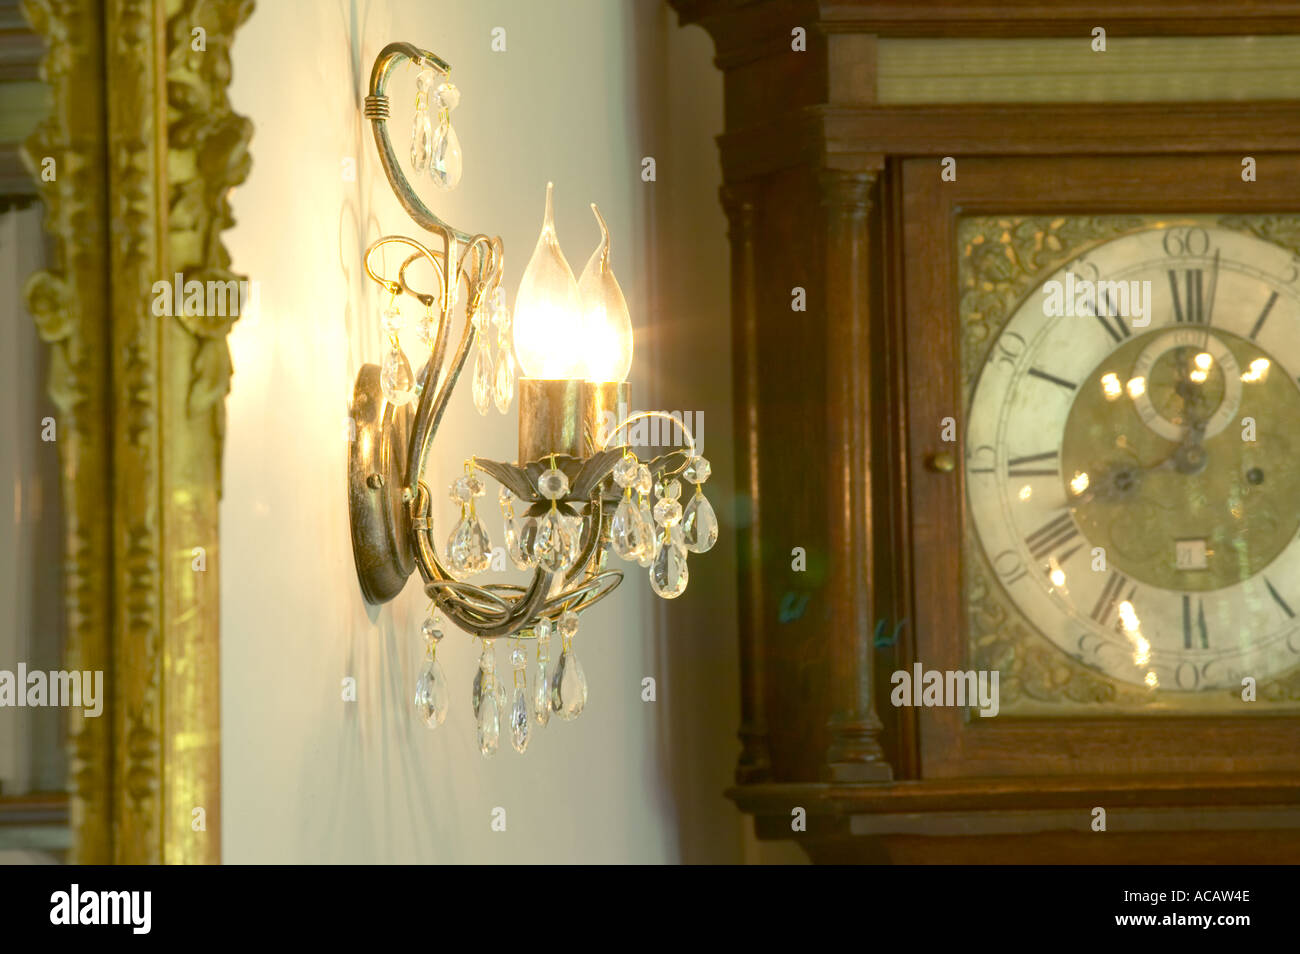 wall light fitting with grandfather clock Stock Photo